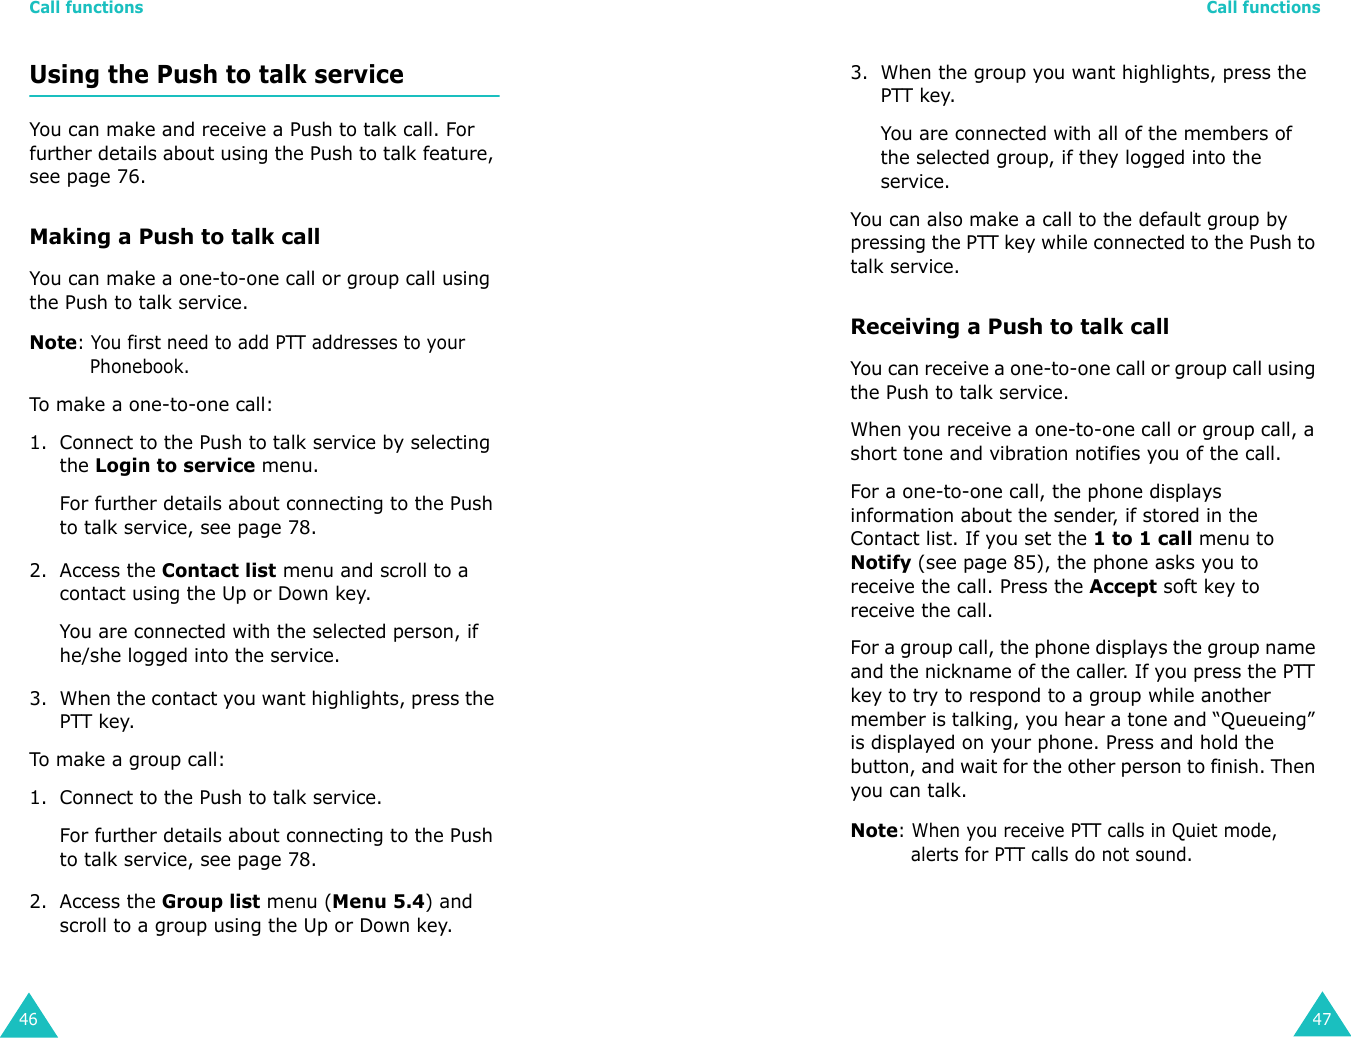 Call functions46Using the Push to talk serviceYou can make and receive a Push to talk call. For further details about using the Push to talk feature, see page 76.Making a Push to talk callYou can make a one-to-one call or group call using the Push to talk service.Note: You first need to add PTT addresses to your Phonebook.To ma ke  a  one- to-o ne ca l l:1. Connect to the Push to talk service by selecting the Login to service menu.For further details about connecting to the Push to talk service, see page 78.2. Access the Contact list menu and scroll to a contact using the Up or Down key.You are connected with the selected person, if  he/she logged into the service.3. When the contact you want highlights, press the PTT key.To ma ke  a  grou p cal l:1. Connect to the Push to talk service.For further details about connecting to the Push to talk service, see page 78.2. Access the Group list menu (Menu 5.4) and scroll to a group using the Up or Down key.Call functions473. When the group you want highlights, press the PTT key.You are connected with all of the members of the selected group, if they logged into the service.You can also make a call to the default group by pressing the PTT key while connected to the Push to talk service.Receiving a Push to talk callYou can receive a one-to-one call or group call using the Push to talk service.When you receive a one-to-one call or group call, a short tone and vibration notifies you of the call. For a one-to-one call, the phone displays information about the sender, if stored in the Contact list. If you set the 1 to 1 call menu to Notify (see page 85), the phone asks you to receive the call. Press the Accept soft key to receive the call.For a group call, the phone displays the group name and the nickname of the caller. If you press the PTT key to try to respond to a group while another member is talking, you hear a tone and “Queueing” is displayed on your phone. Press and hold the button, and wait for the other person to finish. Then you can talk.Note: When you receive PTT calls in Quiet mode, alerts for PTT calls do not sound.